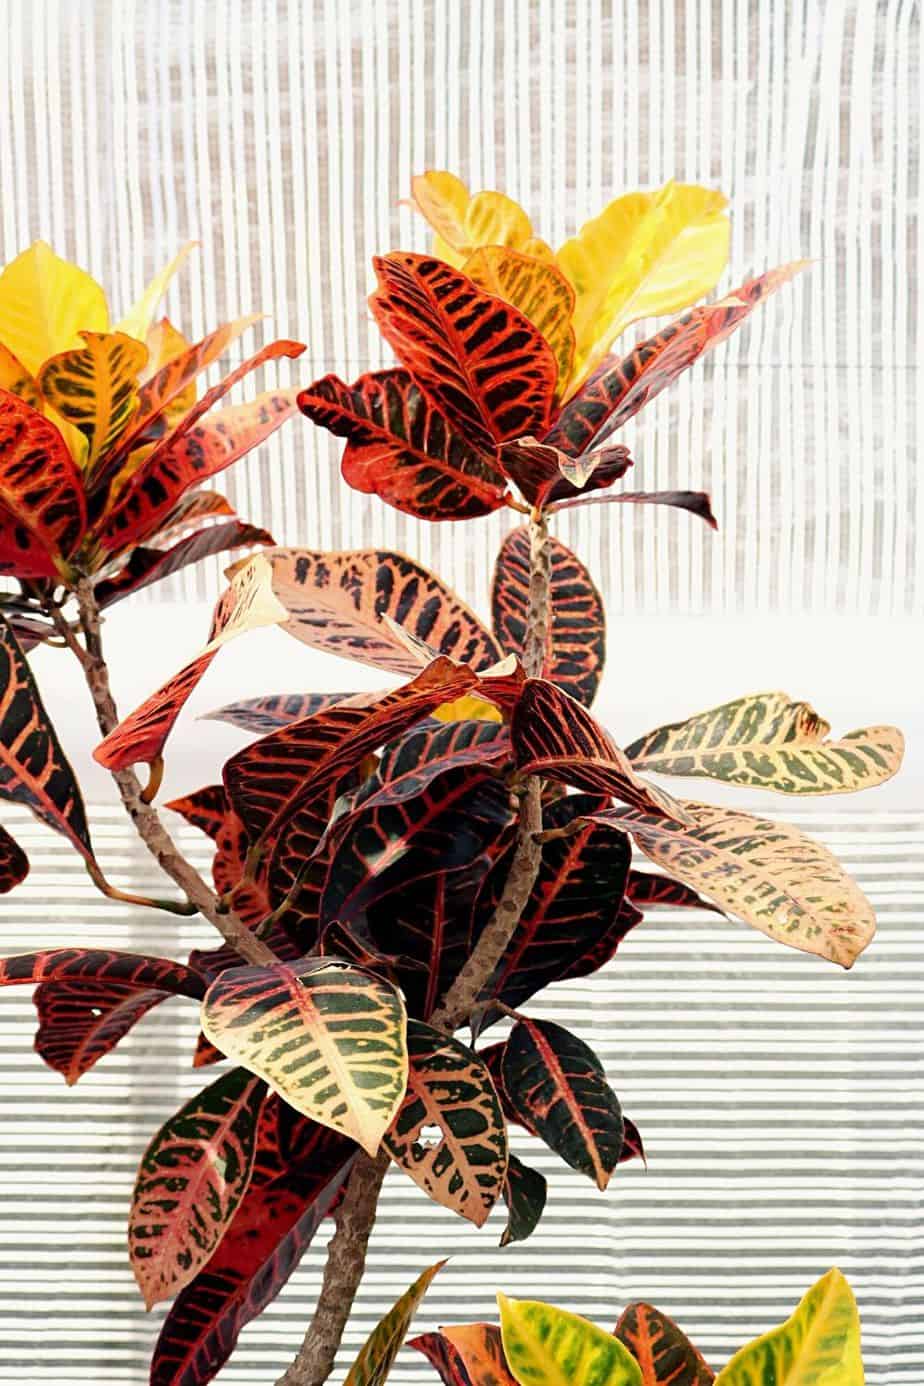 Croton does not grow permanently in water, but you can use them for cuttings